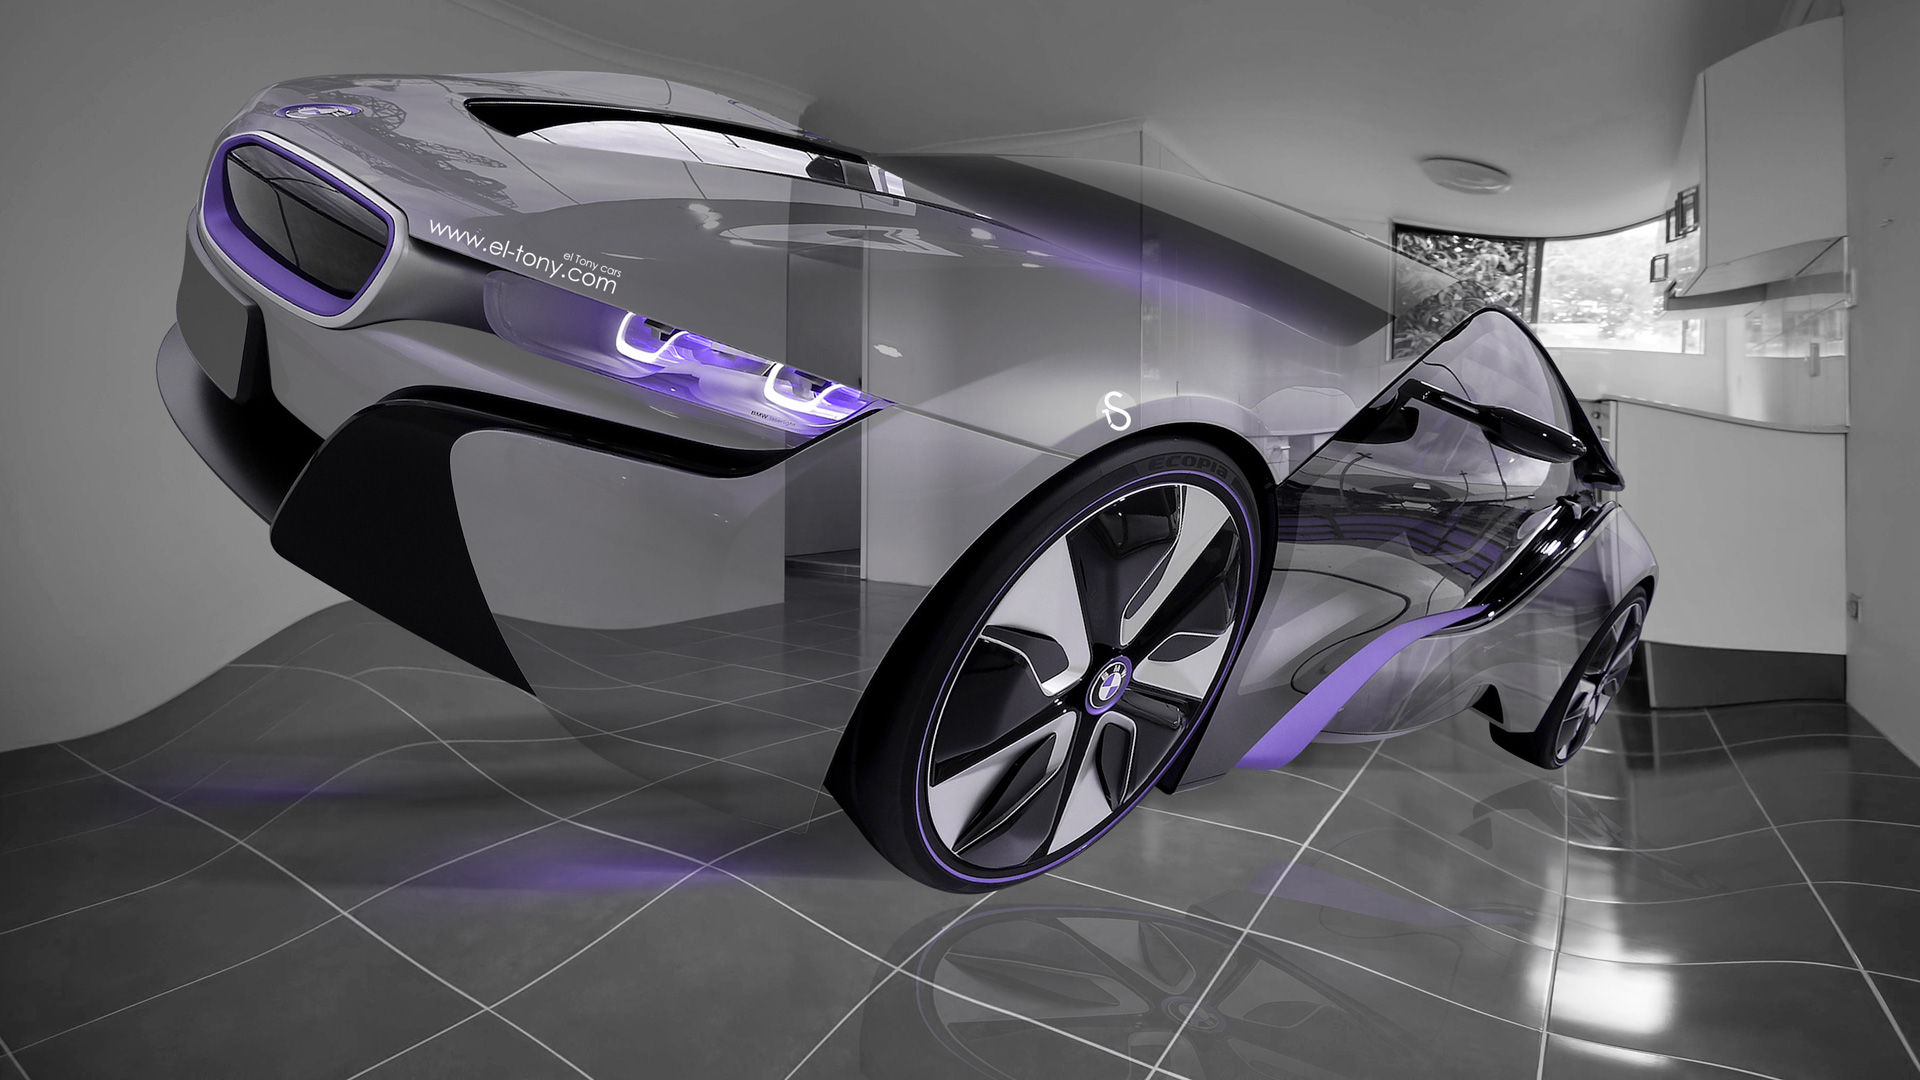 BMW i8 Fantasy Fly Crystal Car Plastic Home Style 2014 Violet Neon HD